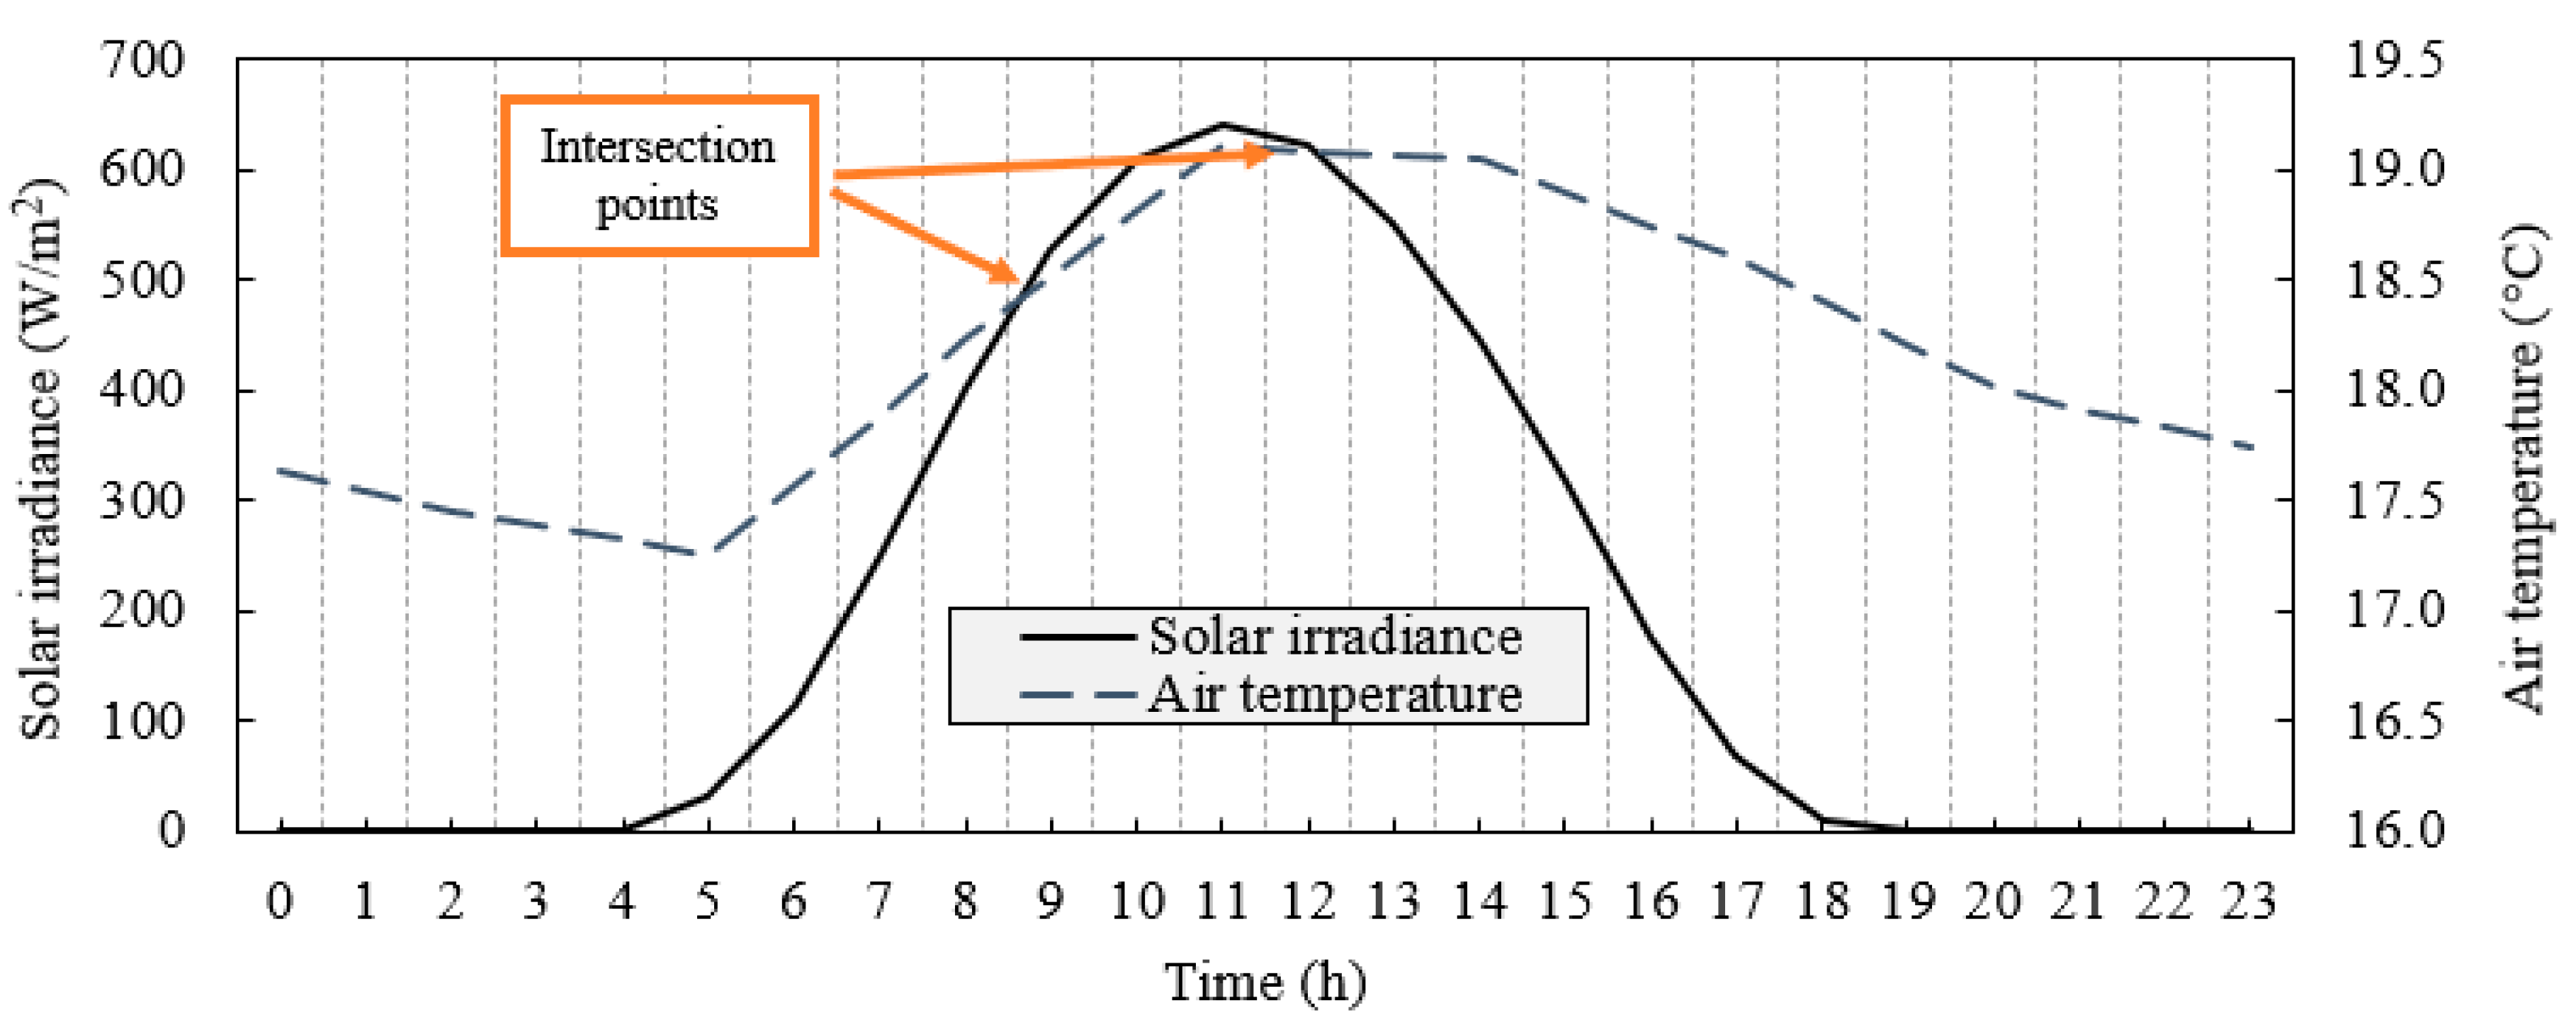 Infrastructures | Free Full-Text | Direct Method to Design Solar  Photovoltaics to Reduce Energy Consumption of Aeration Tanks in Wastewater  Treatment Plants | HTML